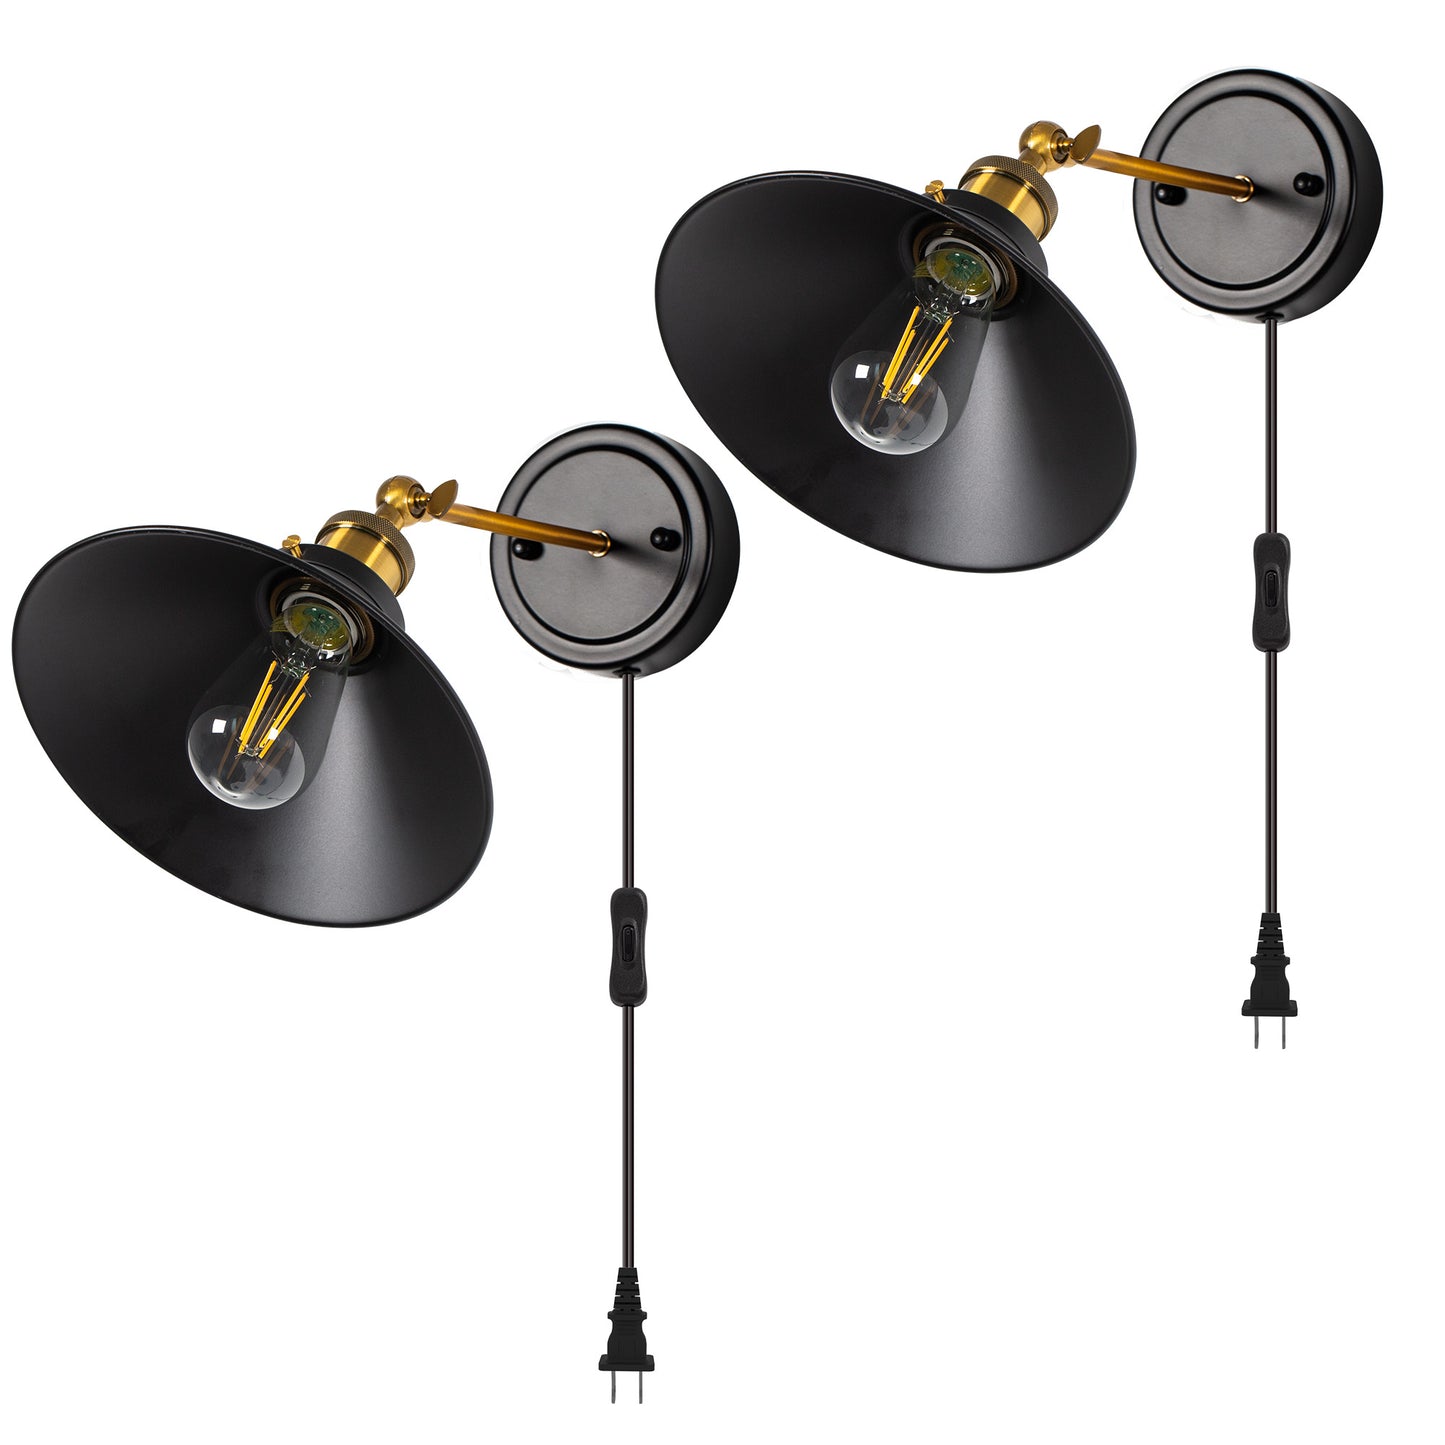 2 PCS Black Wall Sconce Industrial Vintage Wall Lamp Fixture Arm Swing Wall Lights for Bedside Reading Lamp Living Room